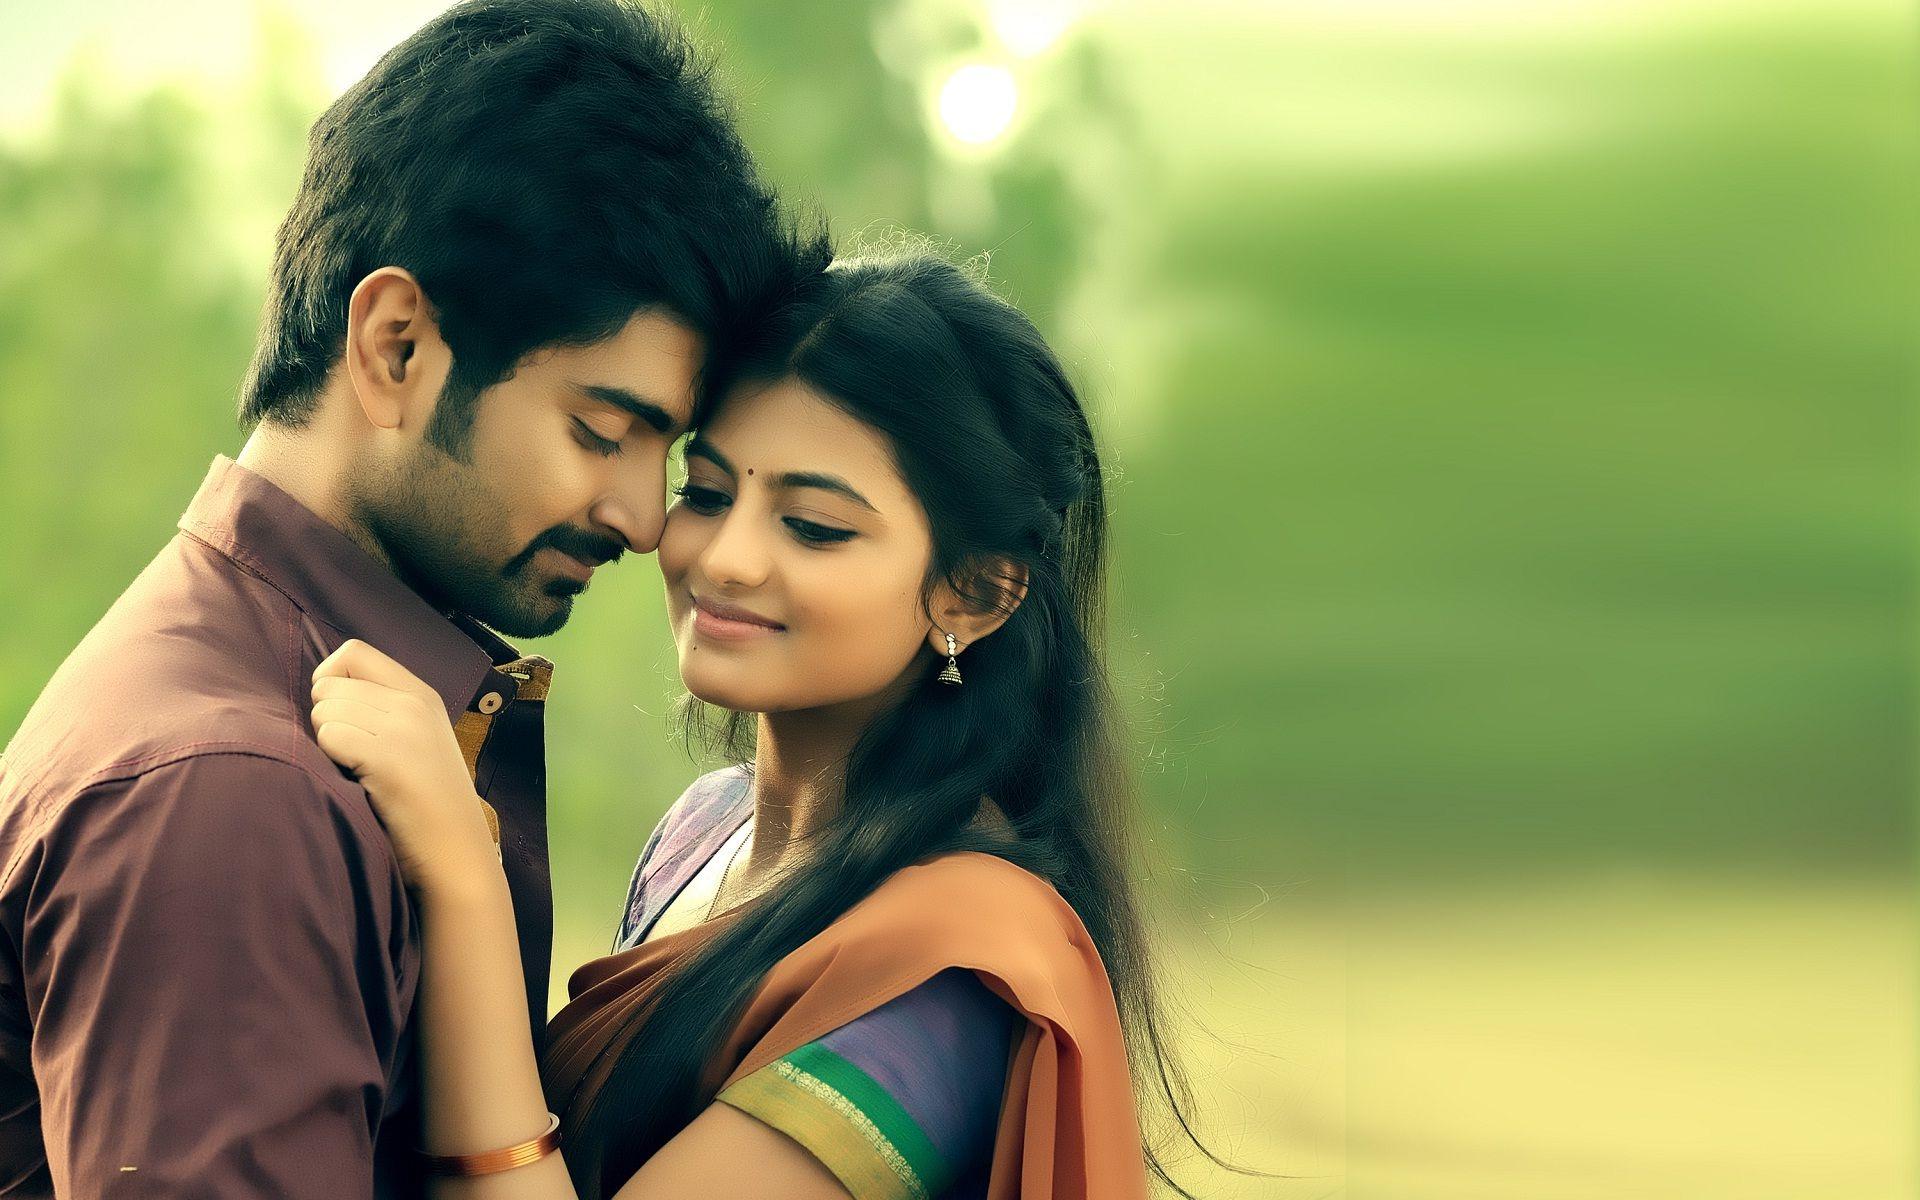 Wallpaper Tamil Love Couples Image